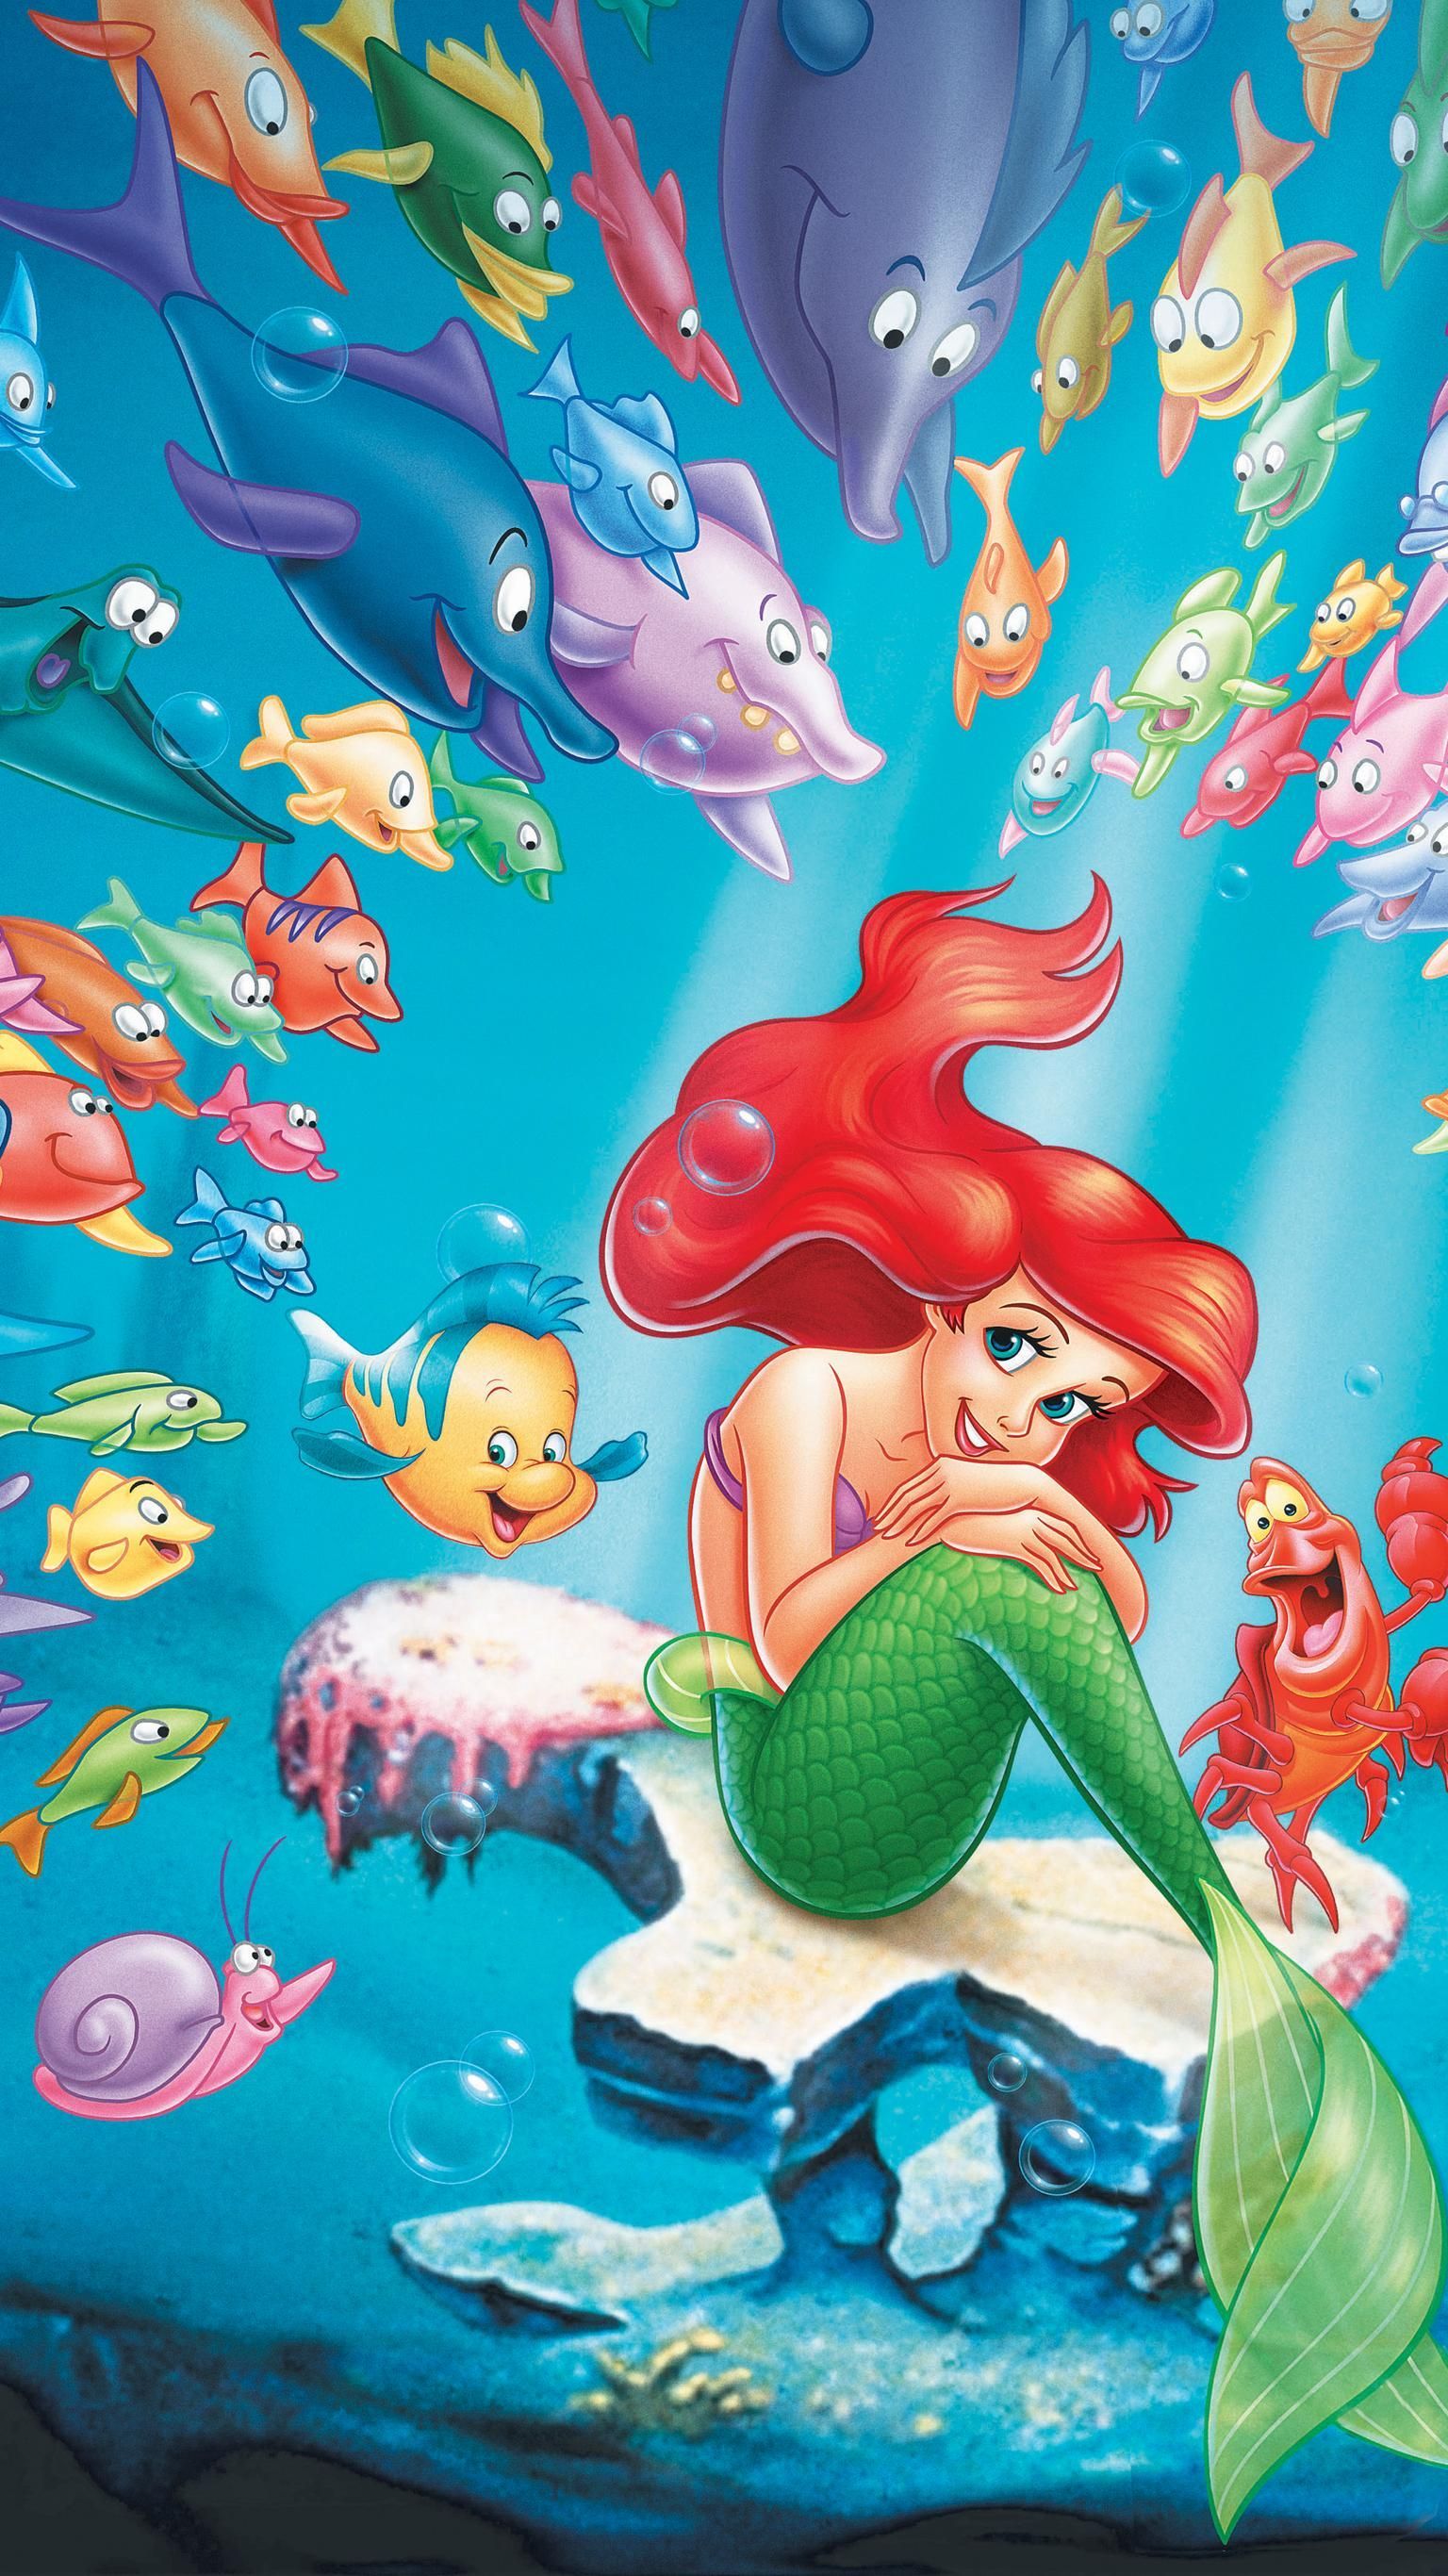 The Little Mermaid (1989) Phone Wallpaper. Moviemania. Mermaid wallpaper, Little mermaid wallpaper, Disney characters poster